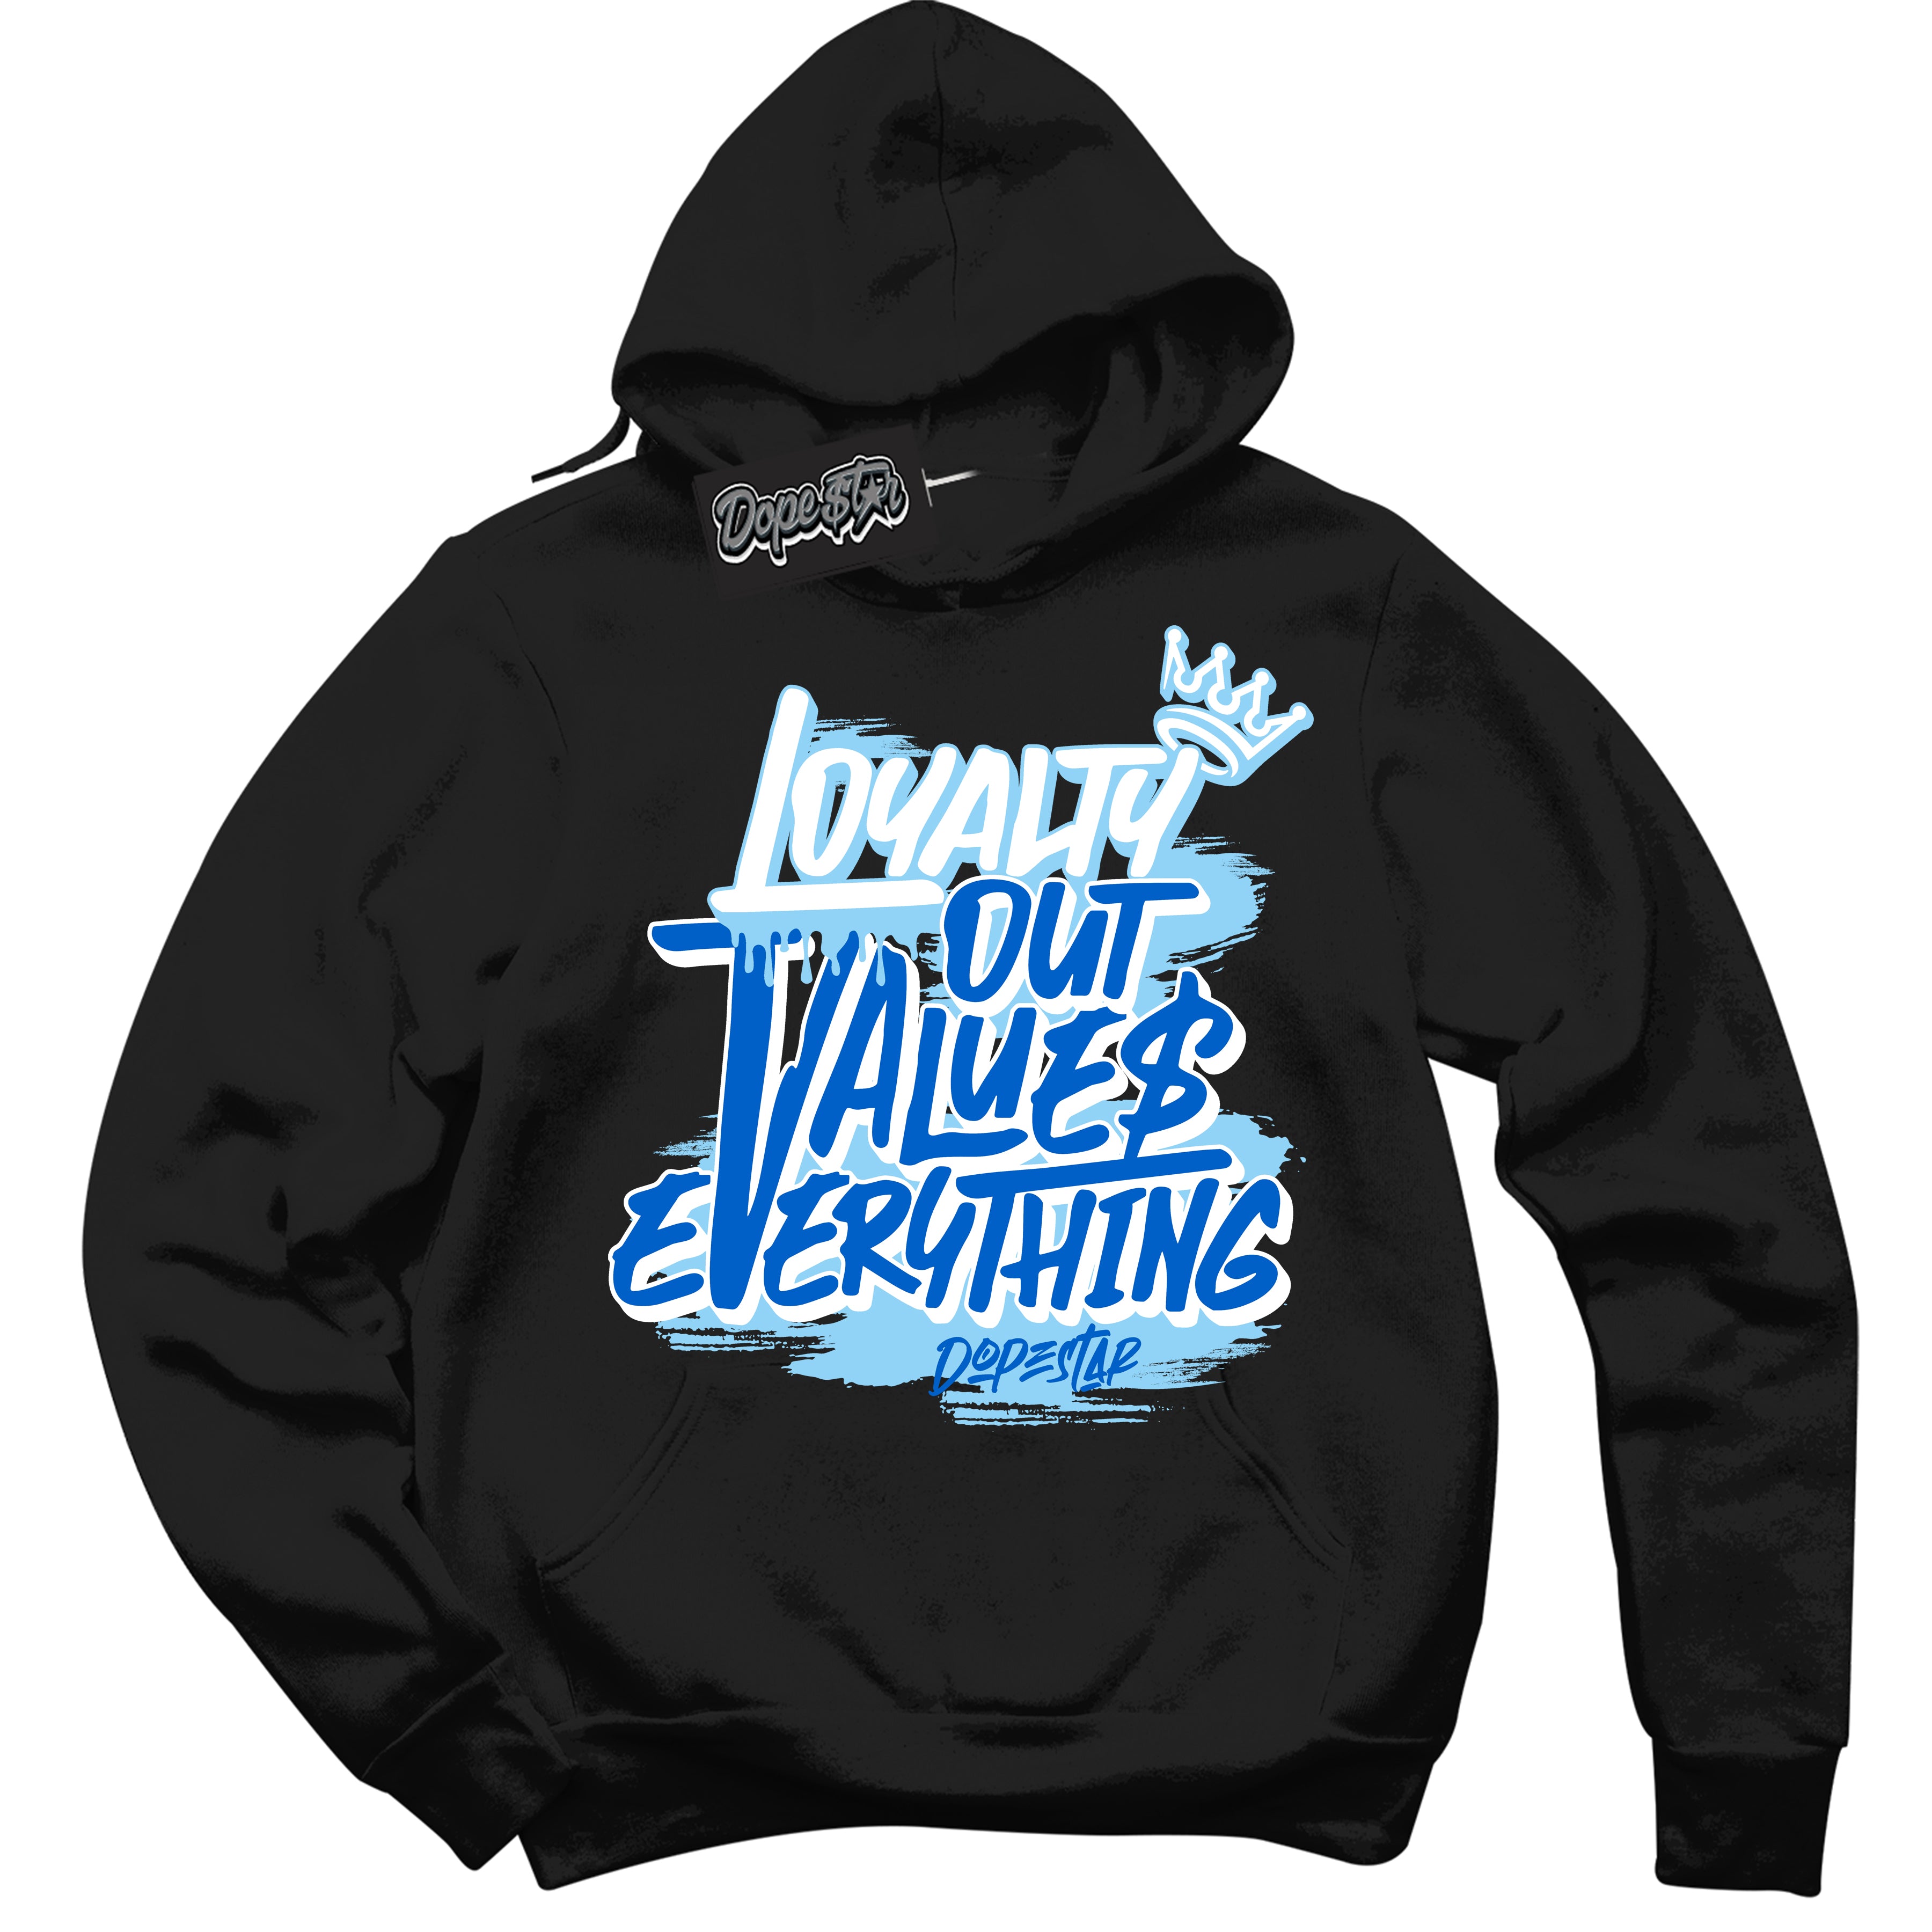 Cool Black Hoodie with “ Loyalty Out Values Everything ”  design that Perfectly Matches  Argon Sneakers.